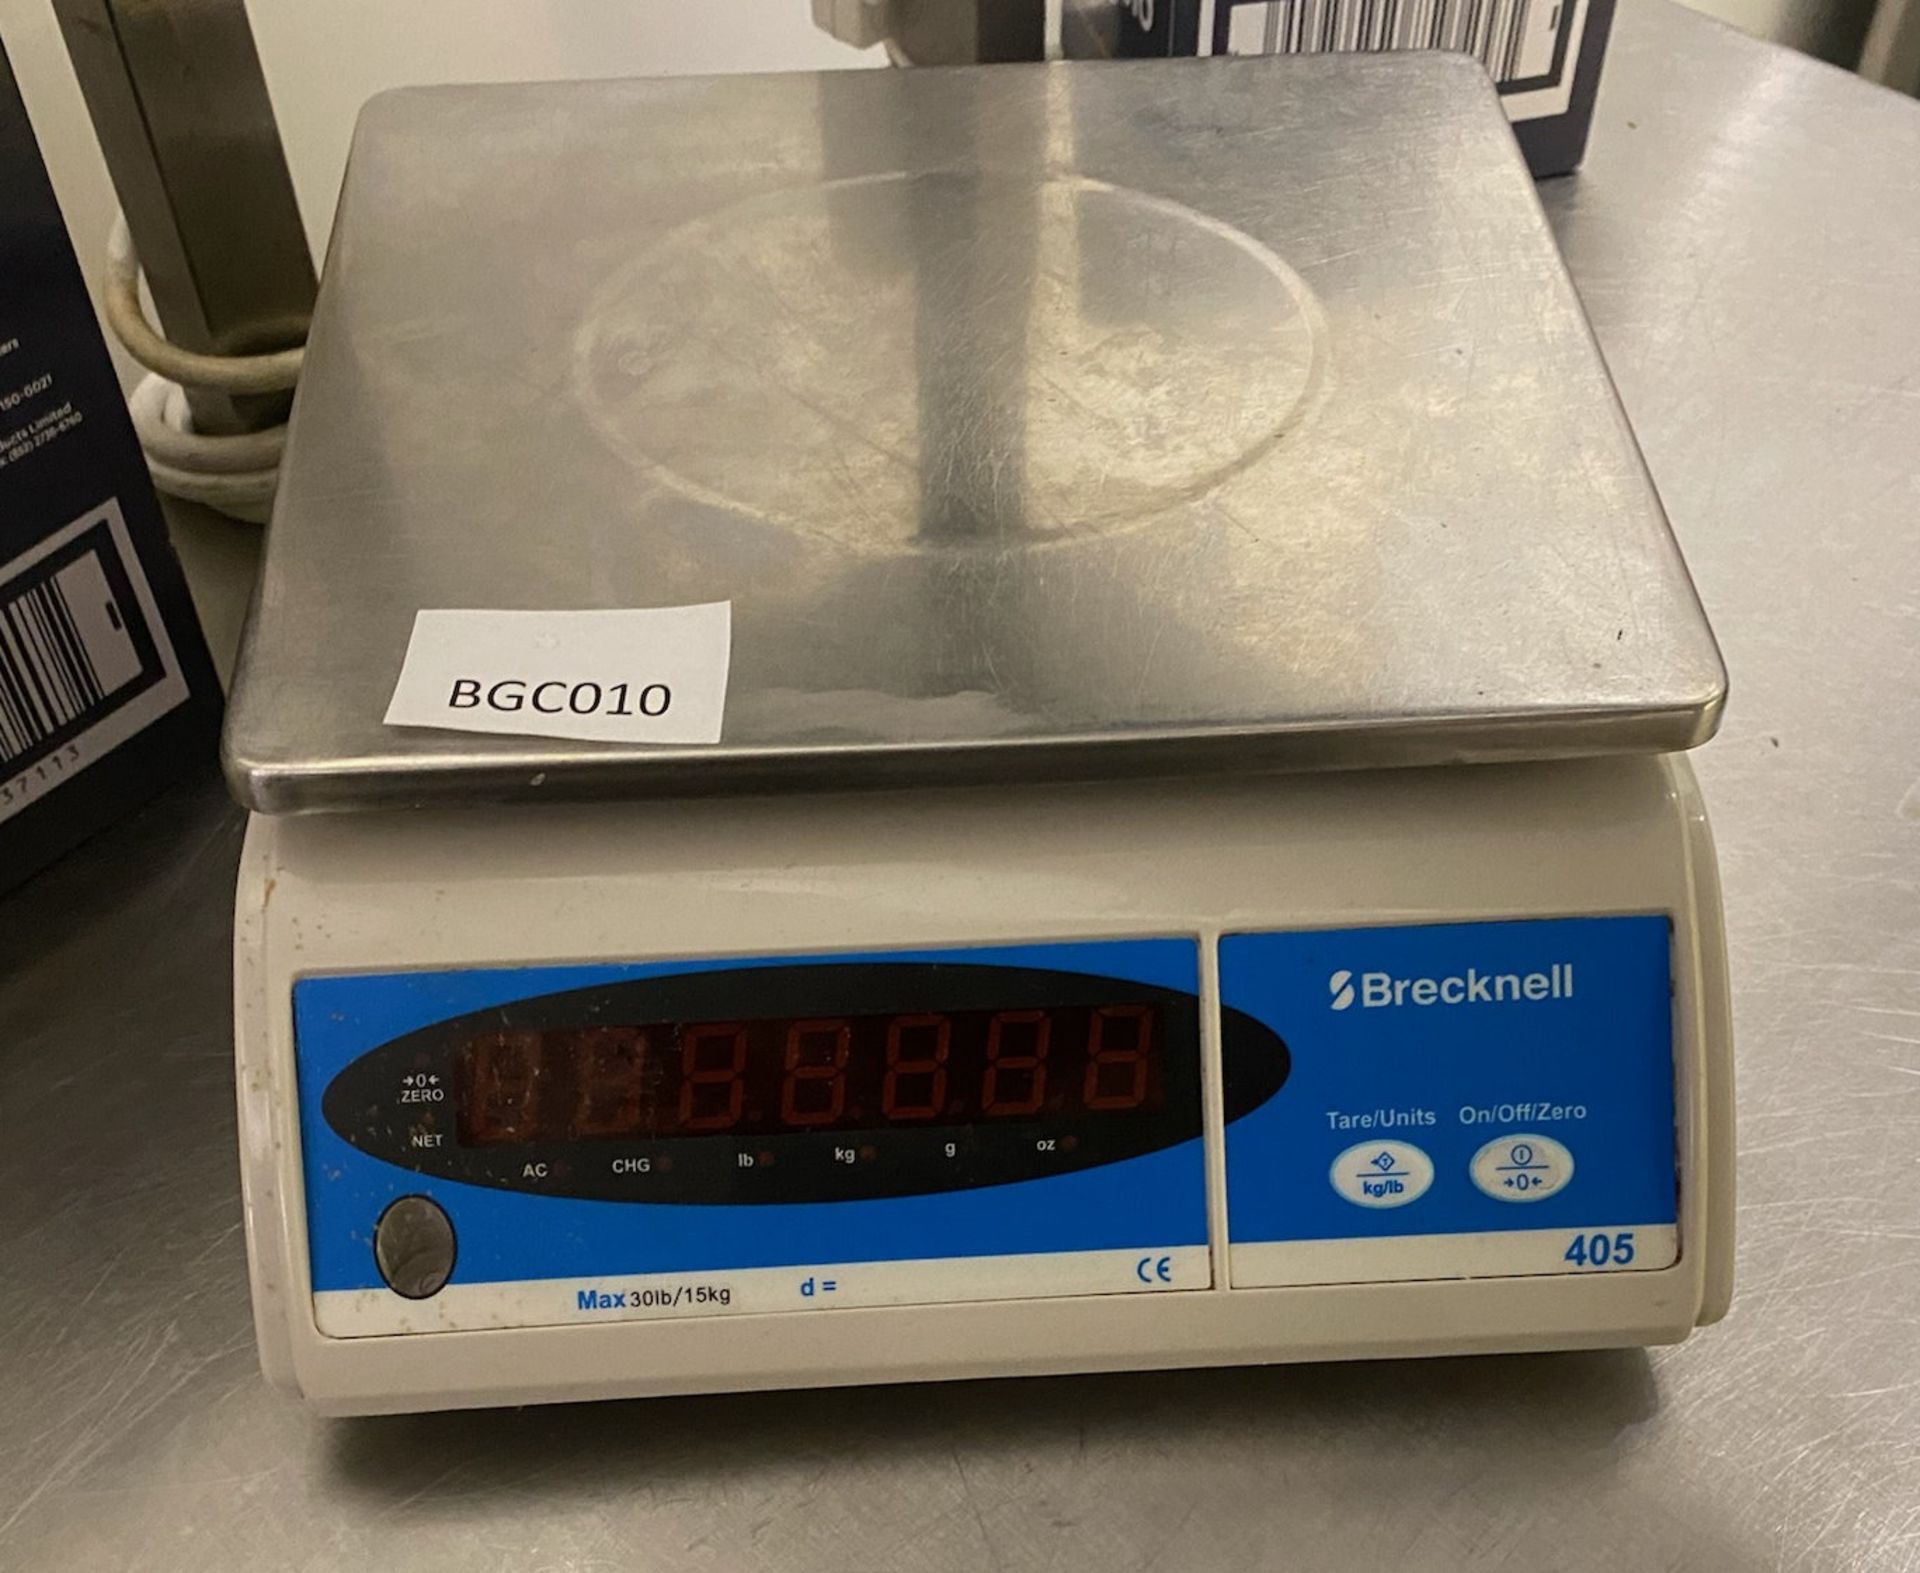 1 x Brecknell 405 Digital Commercial Scales - Ref: BGC010 - CL807 - Covent Garden, LondonFrom a